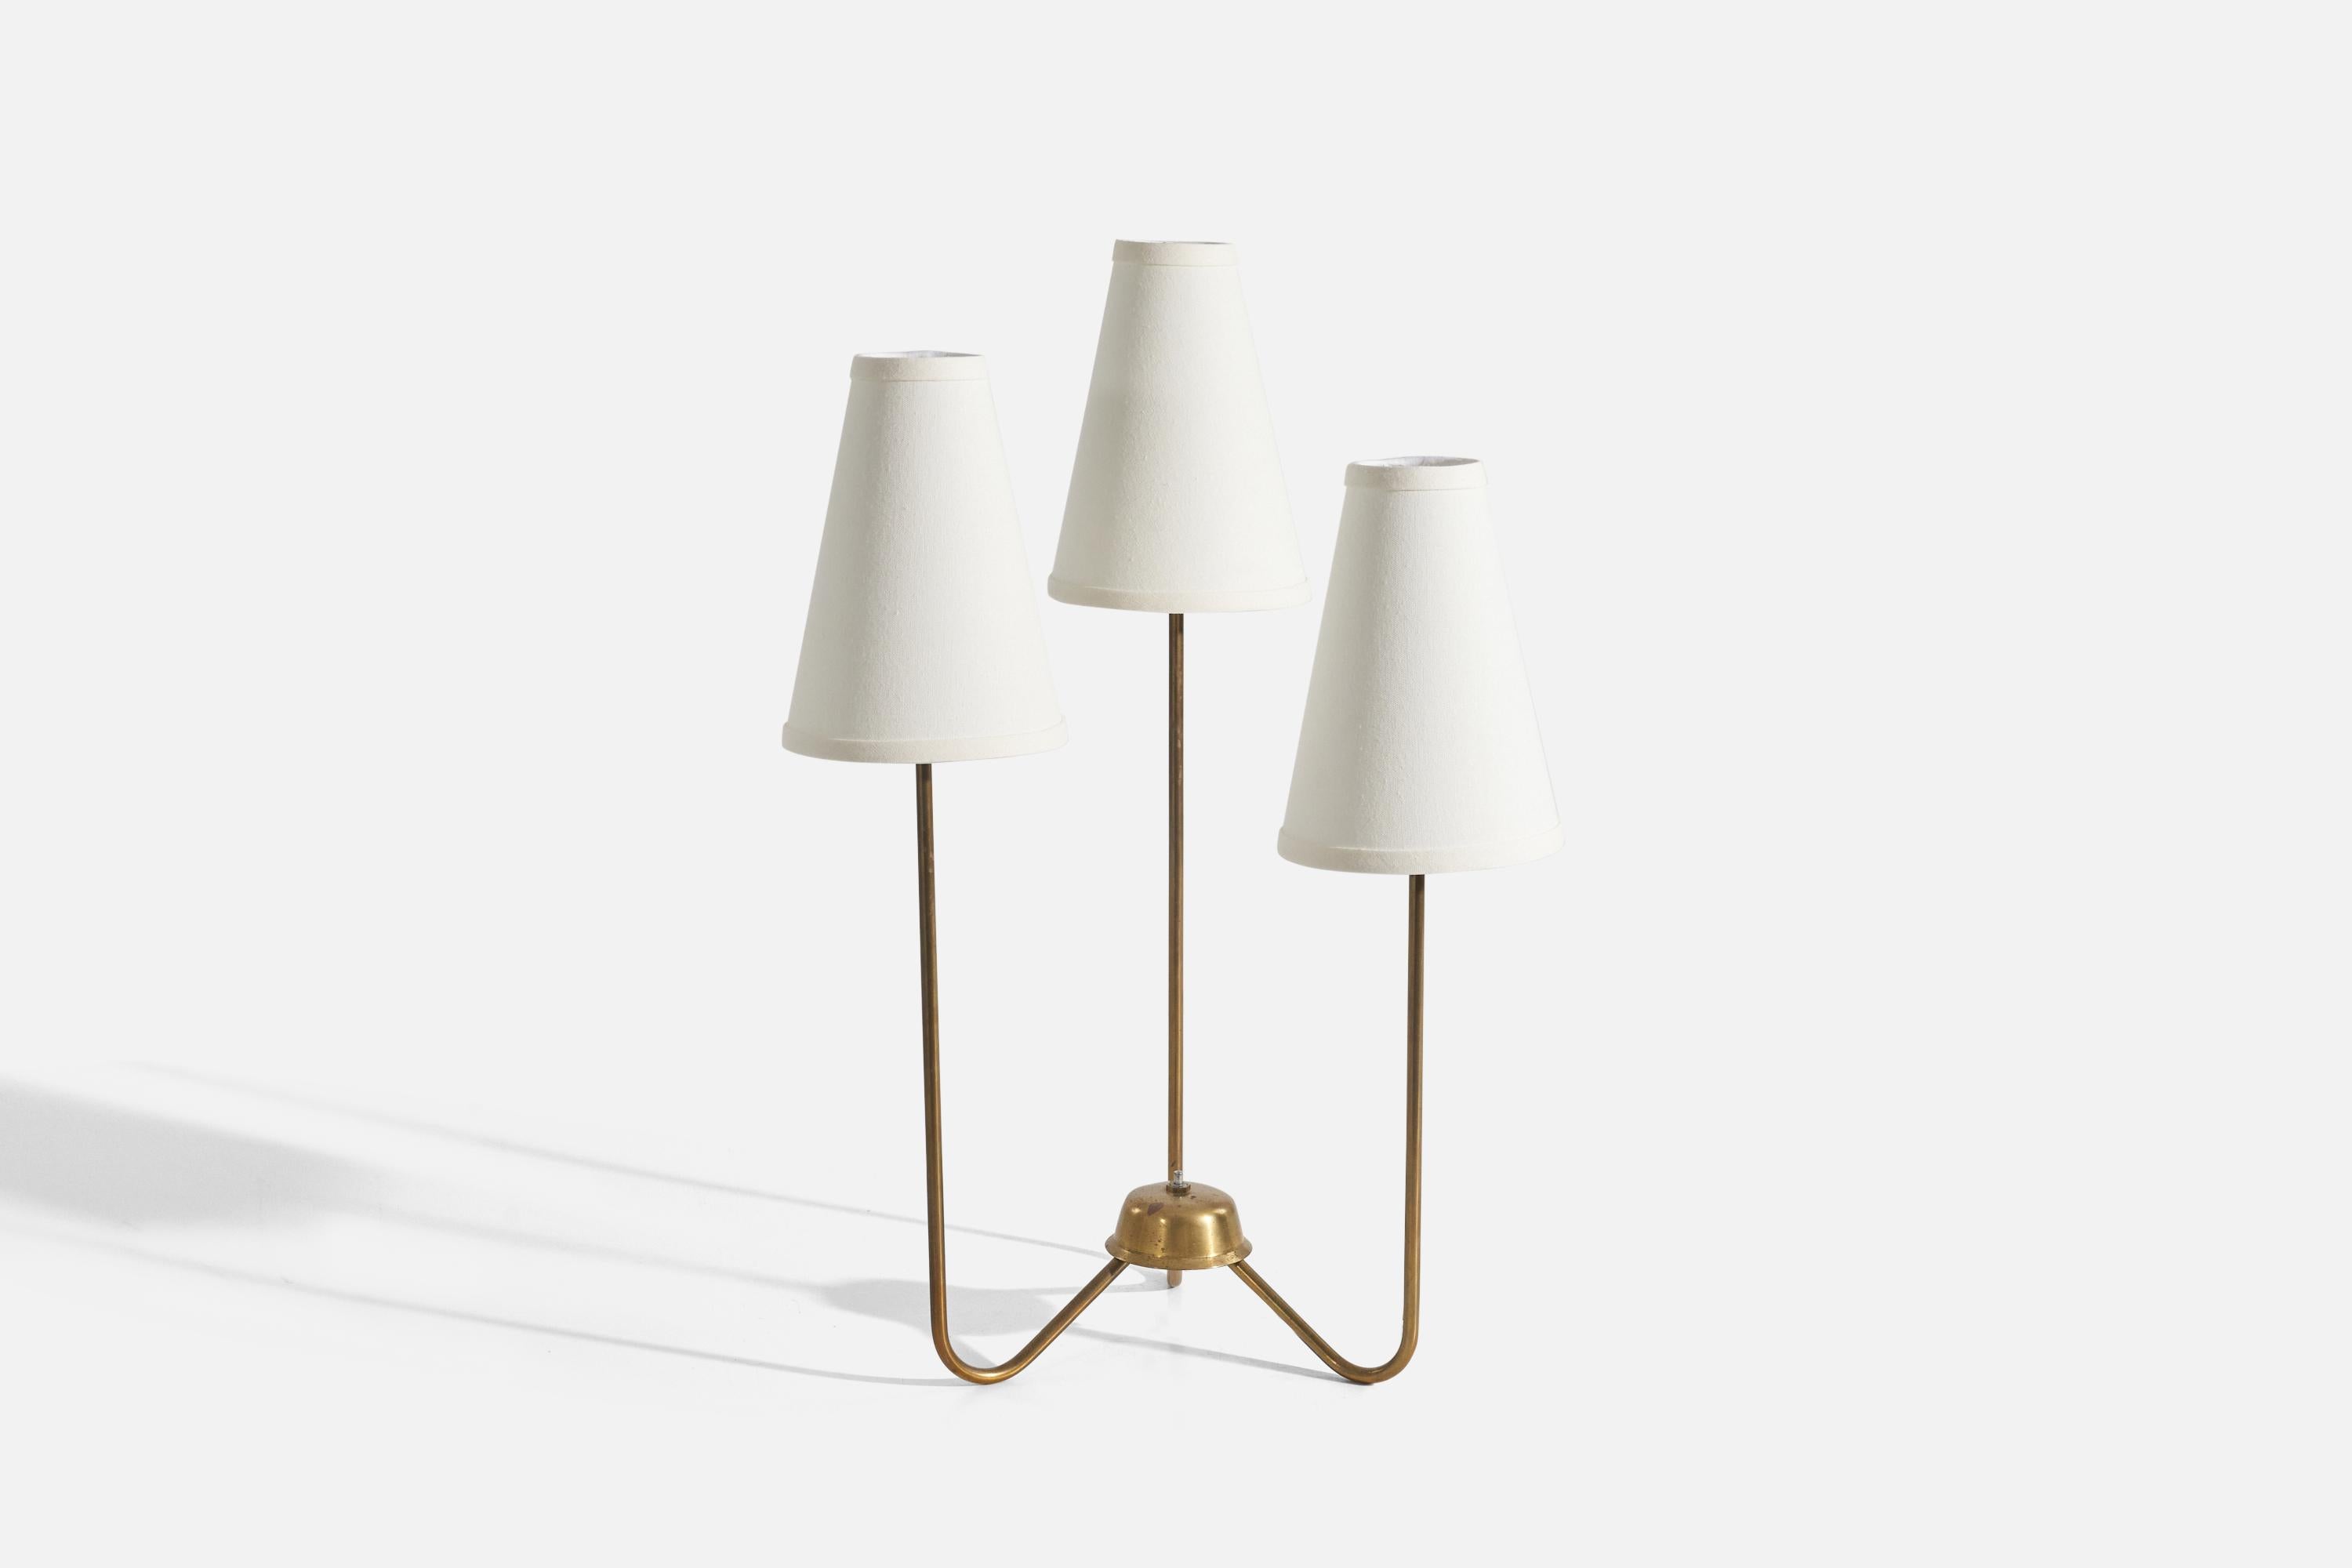 A three-armed brass and fabric table lamp designed by Kurt Versen and produced by his own firm, Kurt Versen Inc, United States, 1950s. 

Sold with Lampshade(s). Dimensions stated are of Lamp with Shade(s). 

Socket takes standard E-26 medium